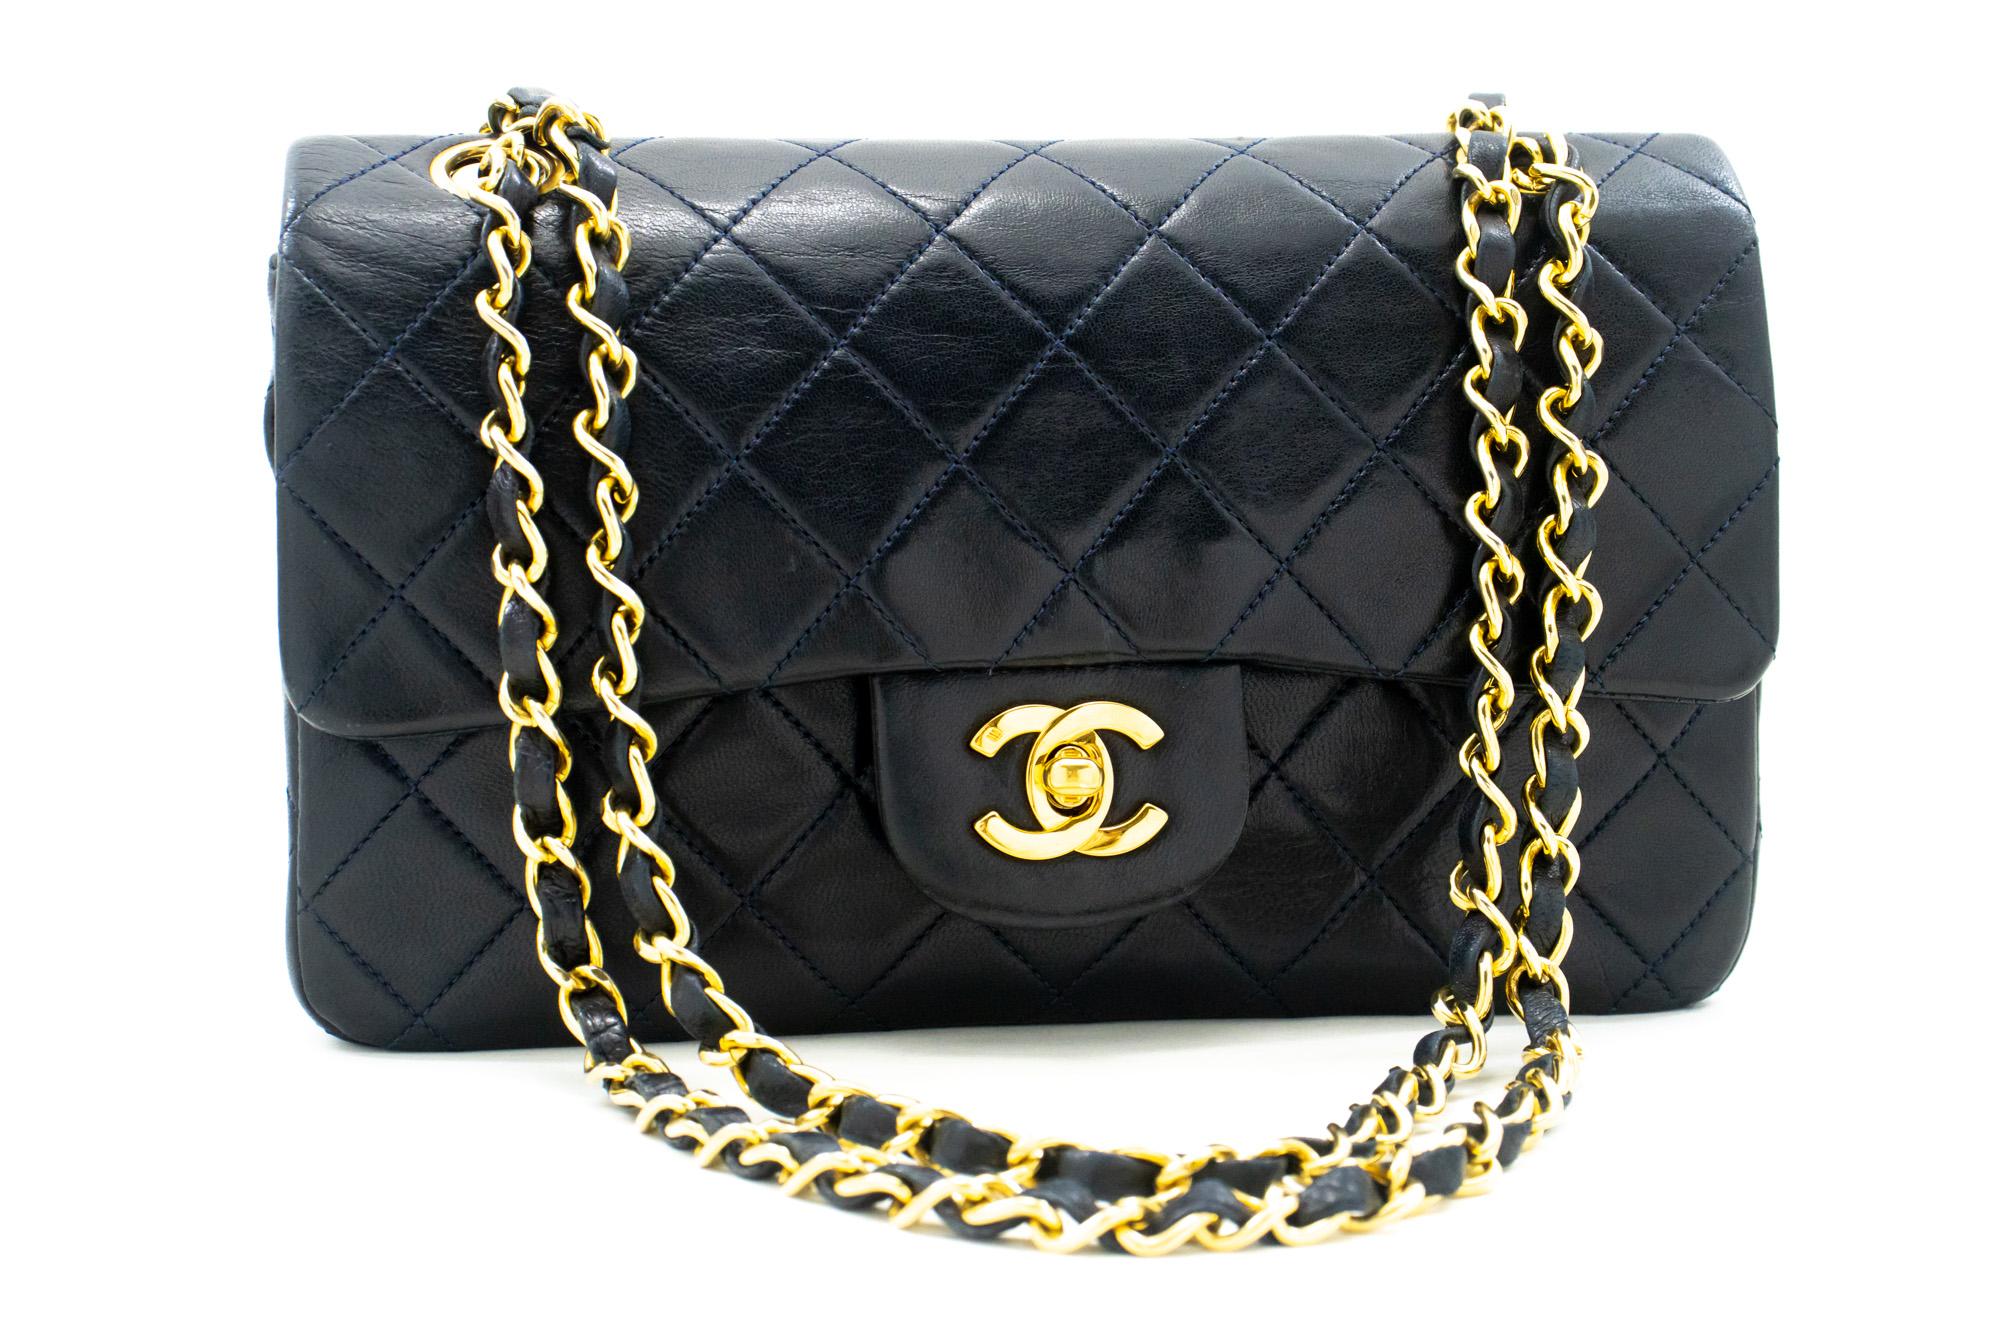 An authentic CHANEL NAVY Classic Double Flap 9